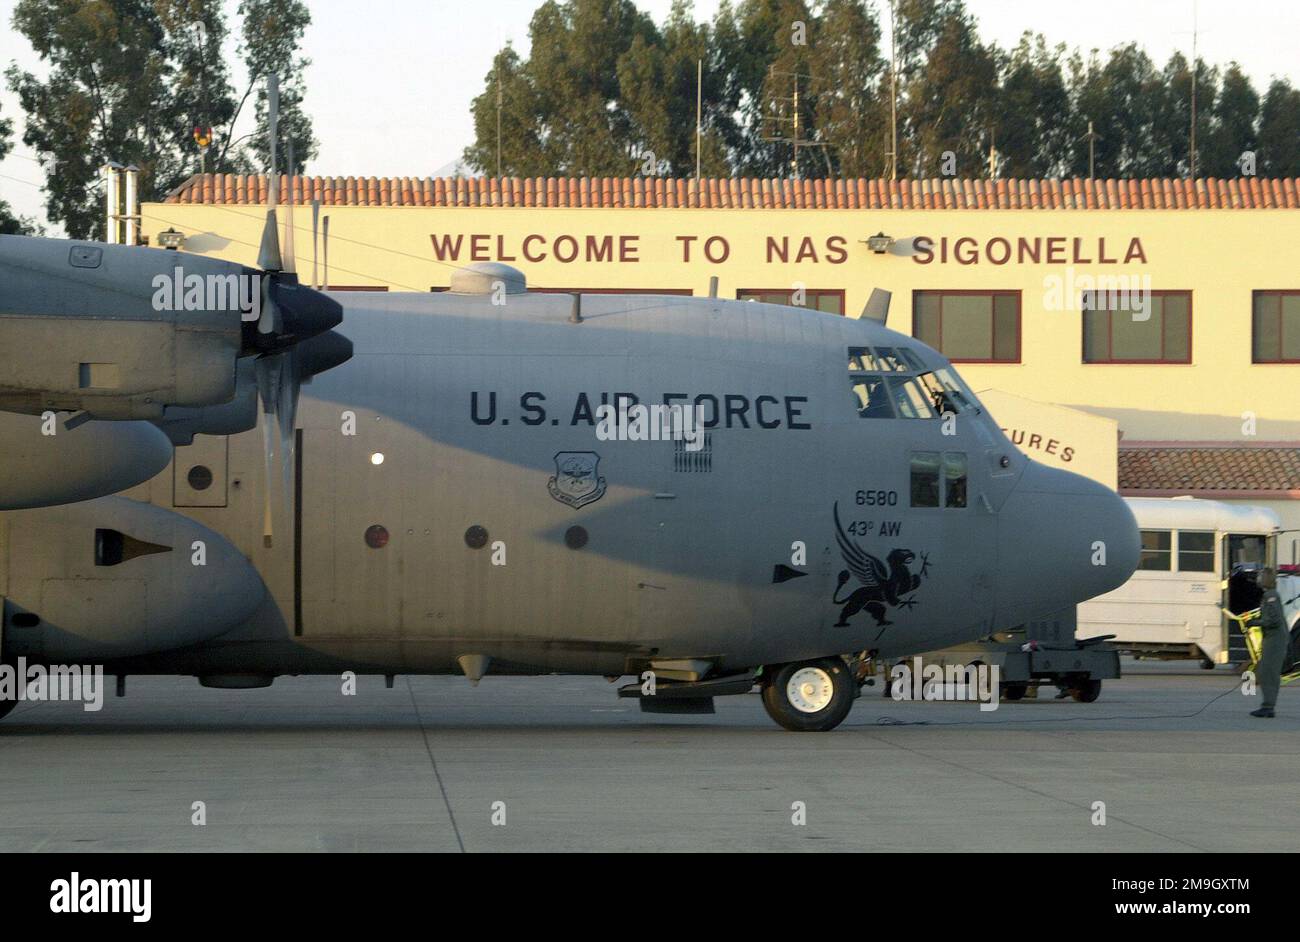 A C-130 Hercules, 43rd Airlift Wing, Pope AFB, North Carolina, arrives at Naval Air Station Sigonella, Sicily. The aircraft carried country singer Clint Black and other entertainers to Sigonella for a free concert during Operation ENDURING FREEDOM. In response to the terrorist attacks on September 11, 2001 at the New York World Trade Center and the Pentagon, President George W. Bush initiated Operation ENDURING FREEDOM in support of the Global War on Terrorism (GWOT), fighting terrorism abroad. Subject Operation/Series: ENDURING FREEDOM Base: Naval Air Station, Sigonella State: Sicily Country: Stock Photo